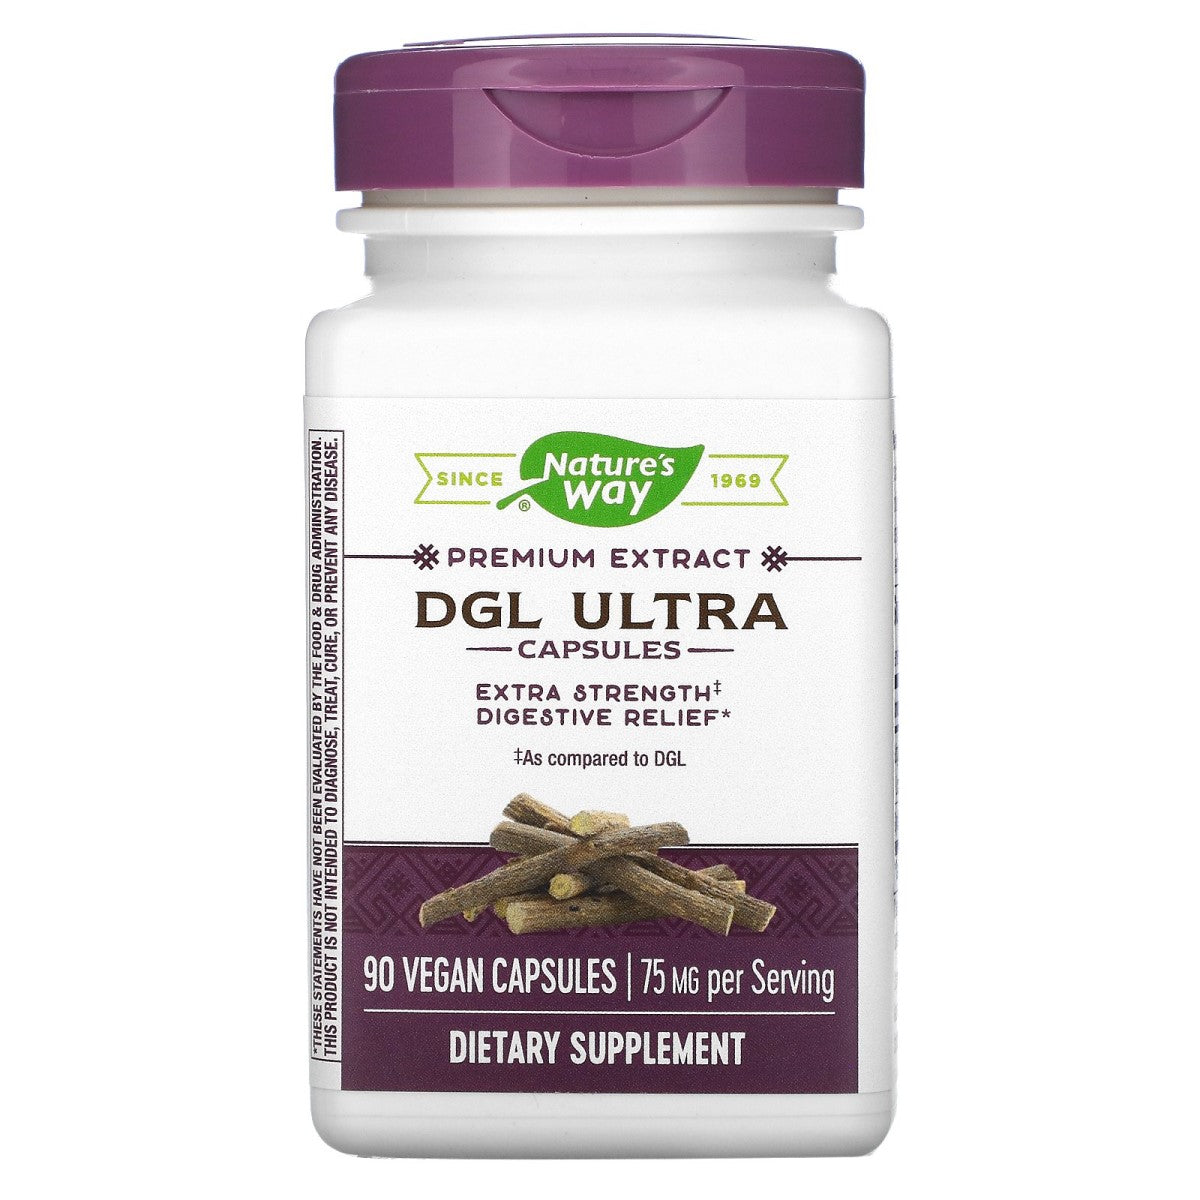 Primary image of DGL Ultra (German Chocolate Flavored)